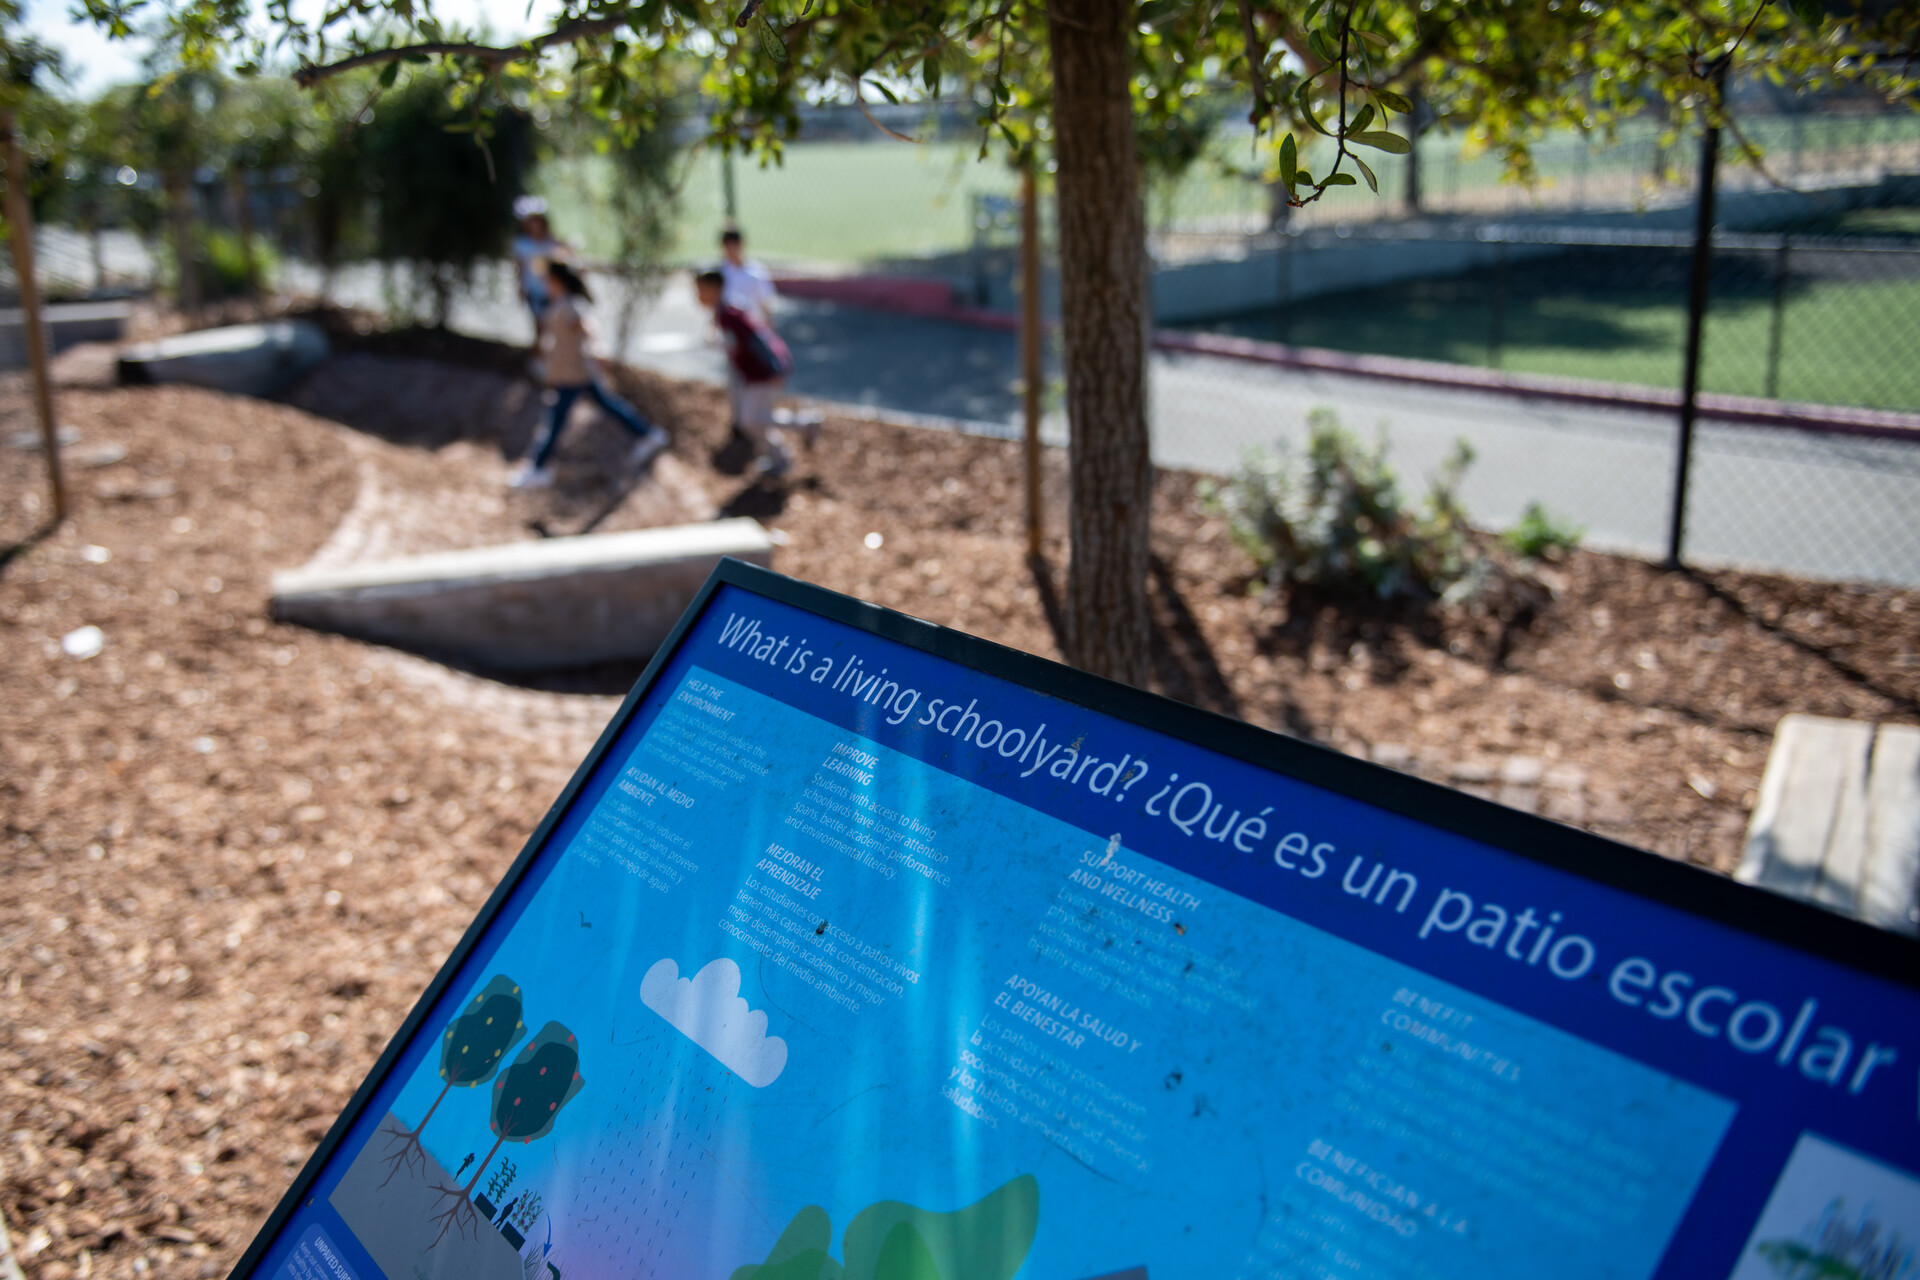 A display in both English and Spanish on the schoolyard.